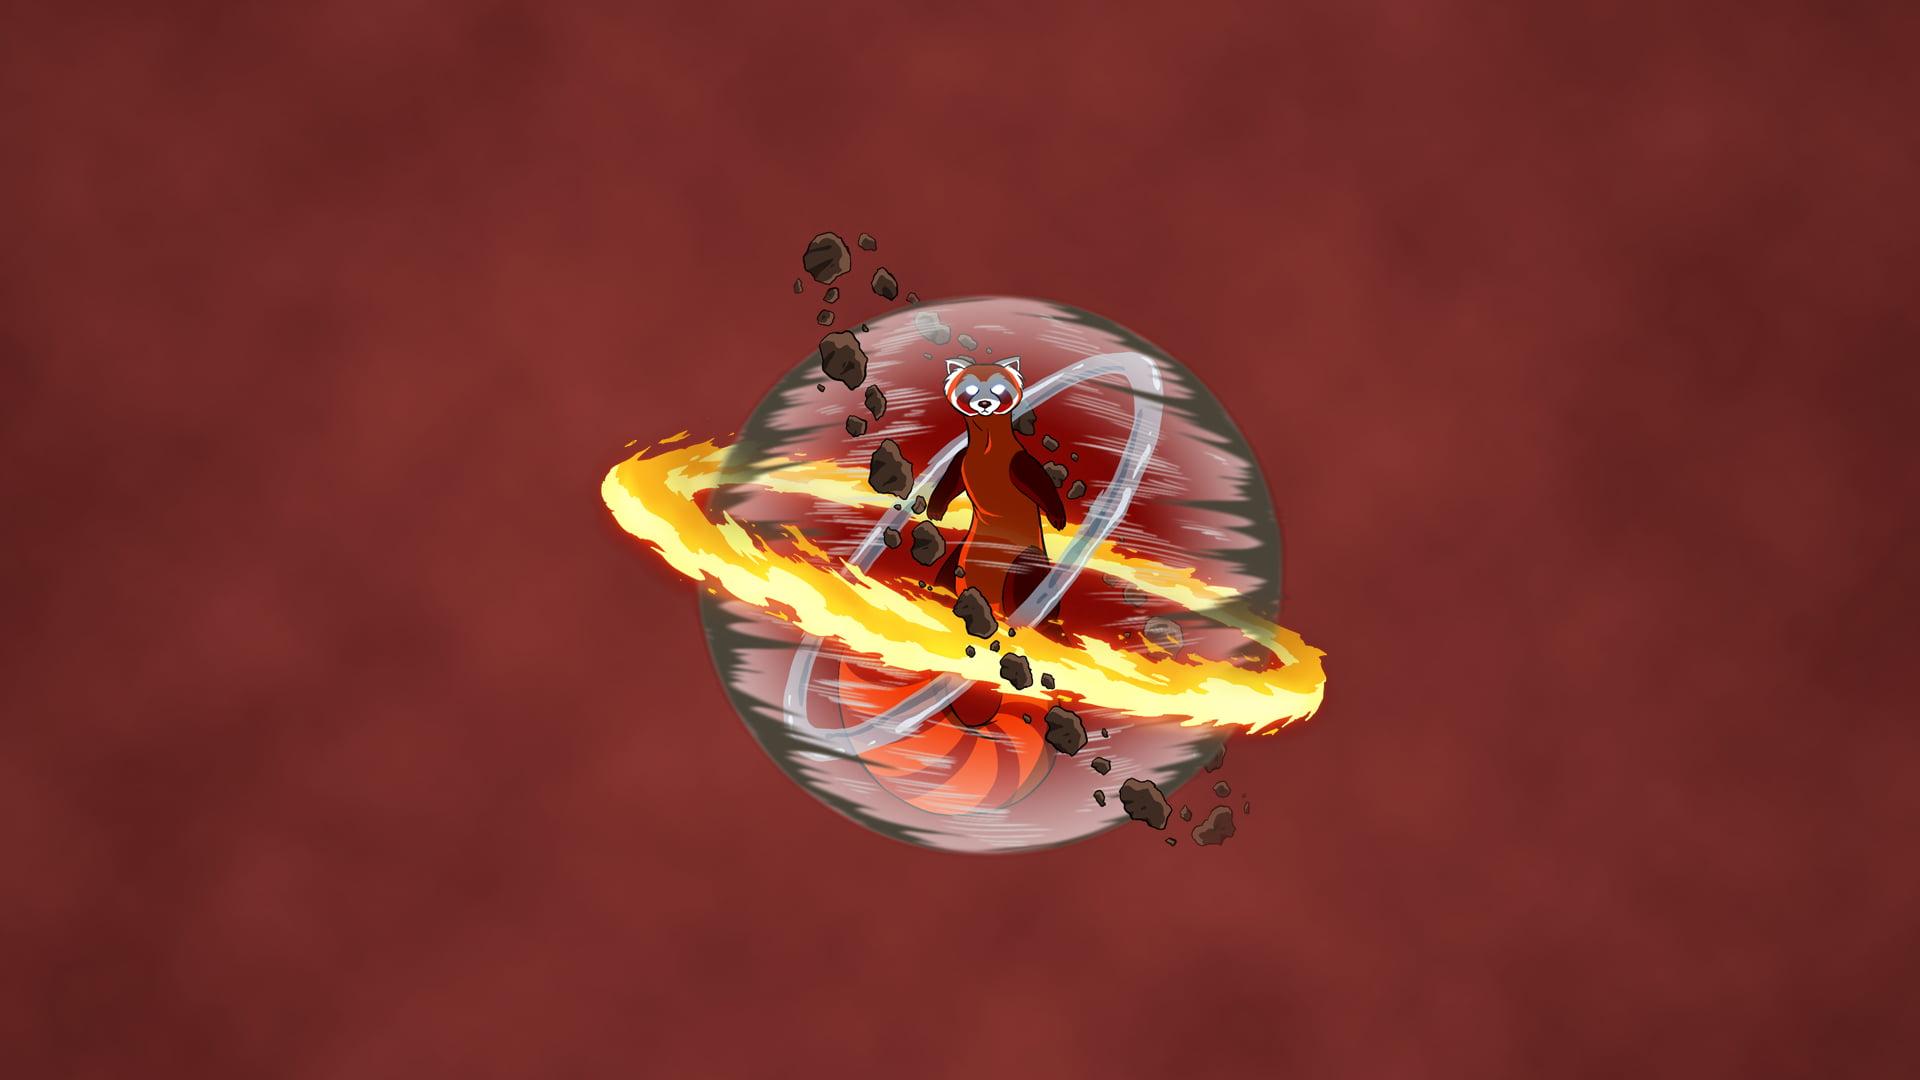 Animated character wallpaper, Avatar: The Last Airbender, Fire